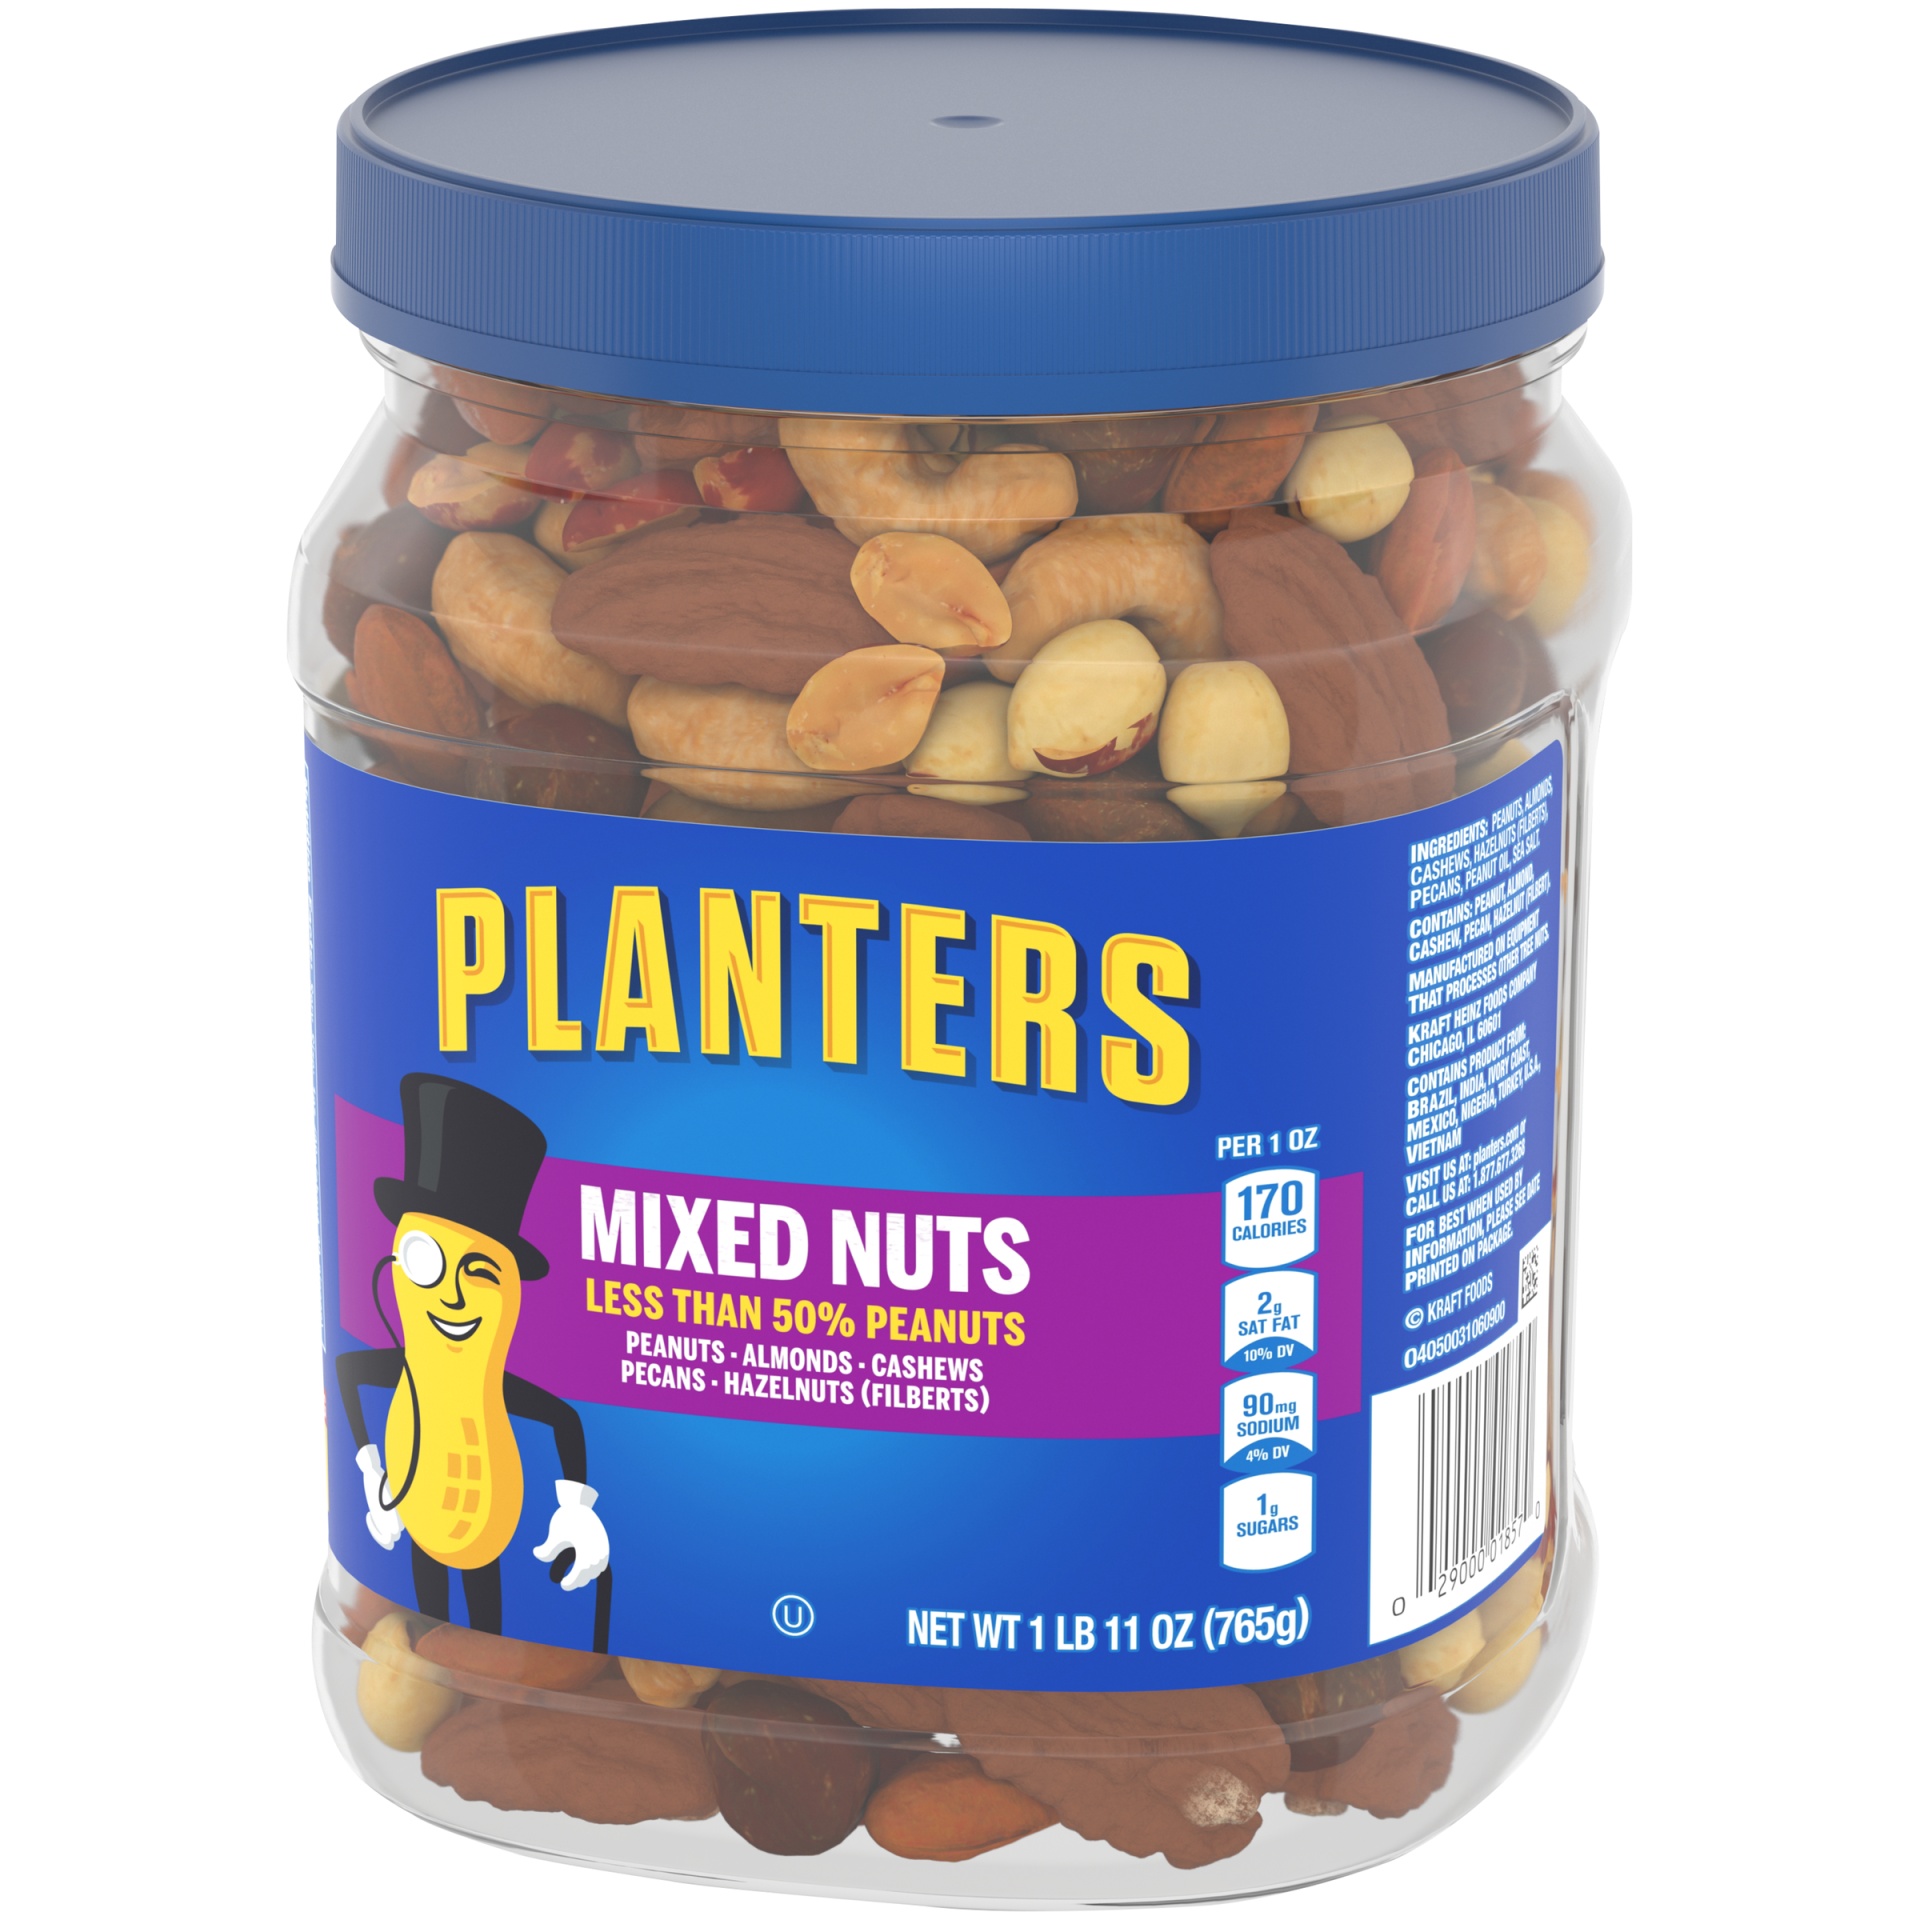 slide 11 of 14, Planters Mixed Nuts Less Than 50% Peanuts with Peanuts, Almonds, Cashews, Pecans & Hazelnuts, 27 oz